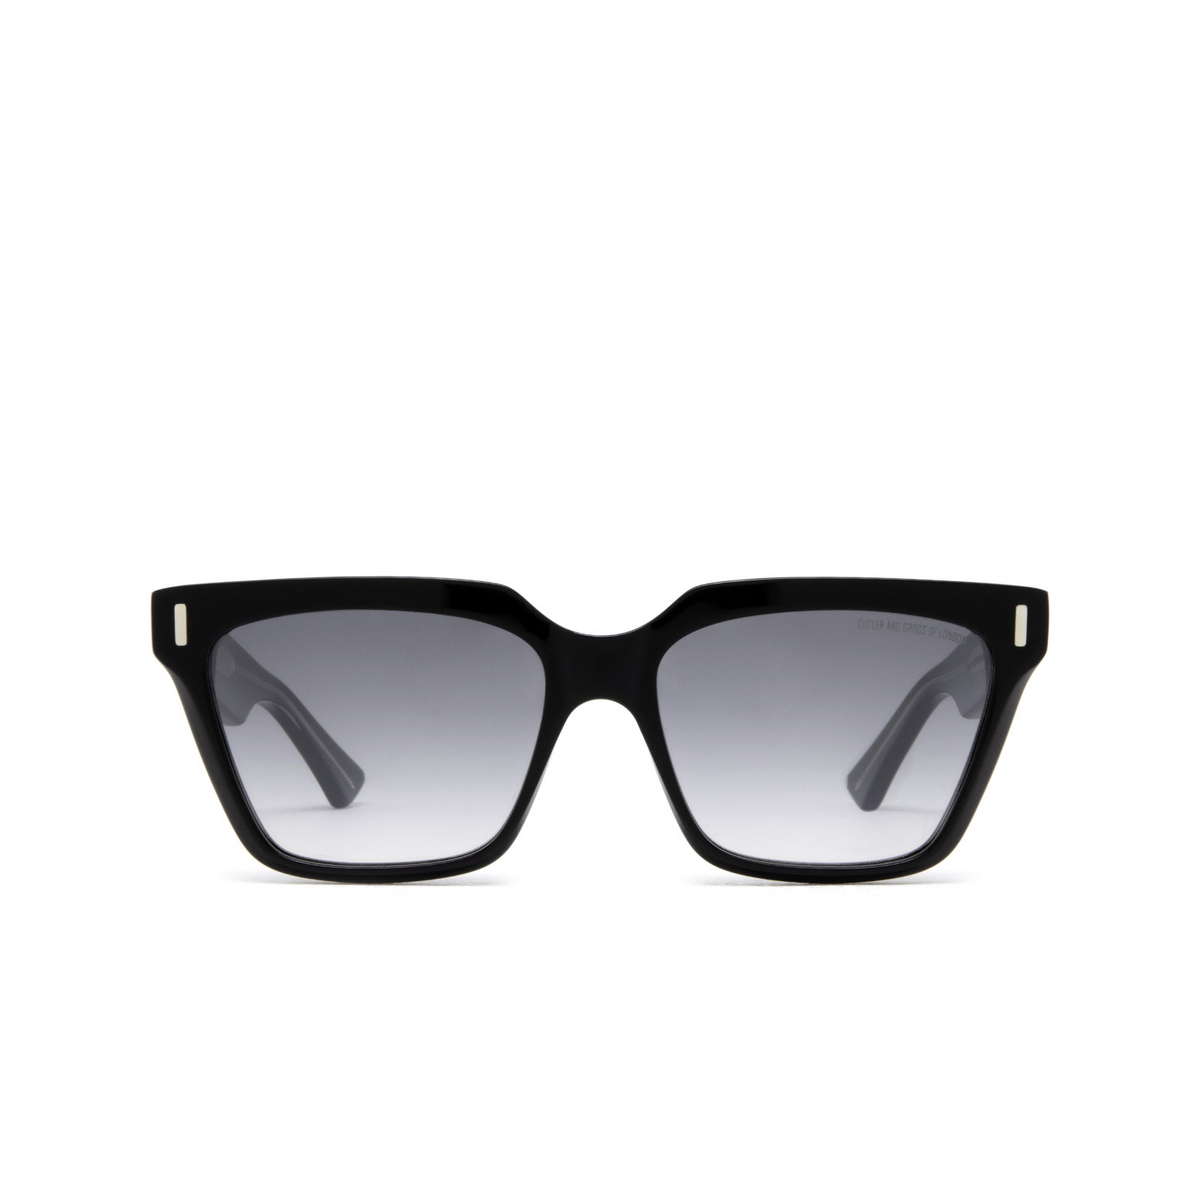 Cutler and Gross 1347 Sunglasses 01 Black Taxi - front view